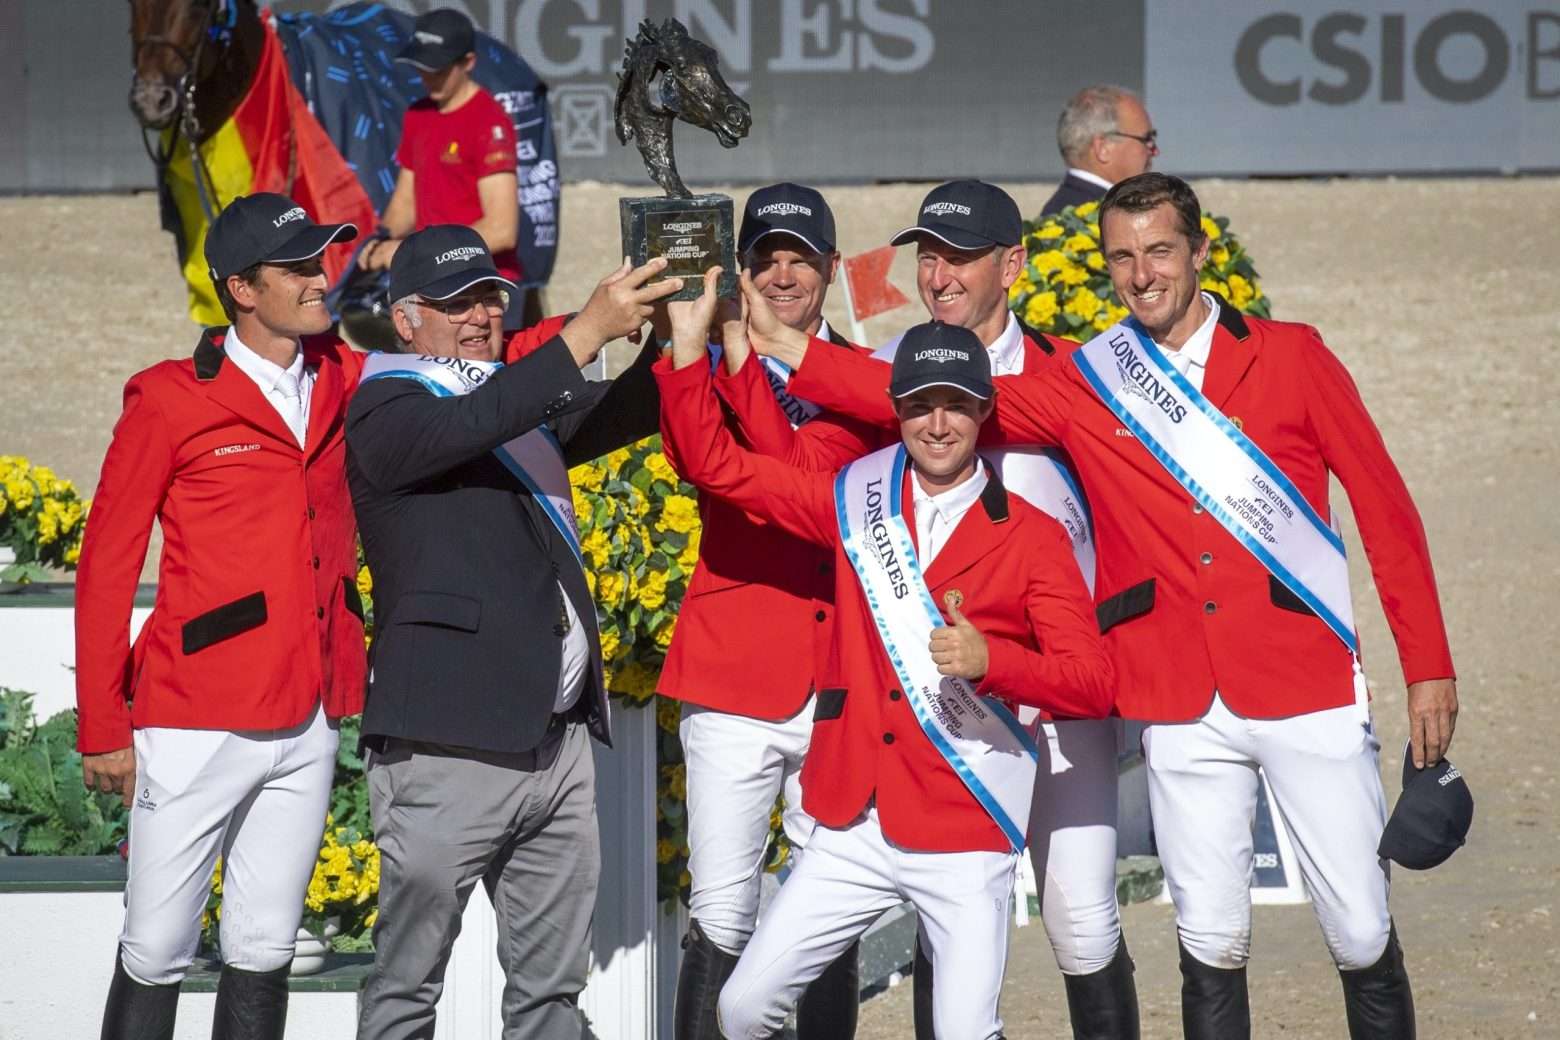 Belgium takes Longines jumping title and ticket for Paris 2024